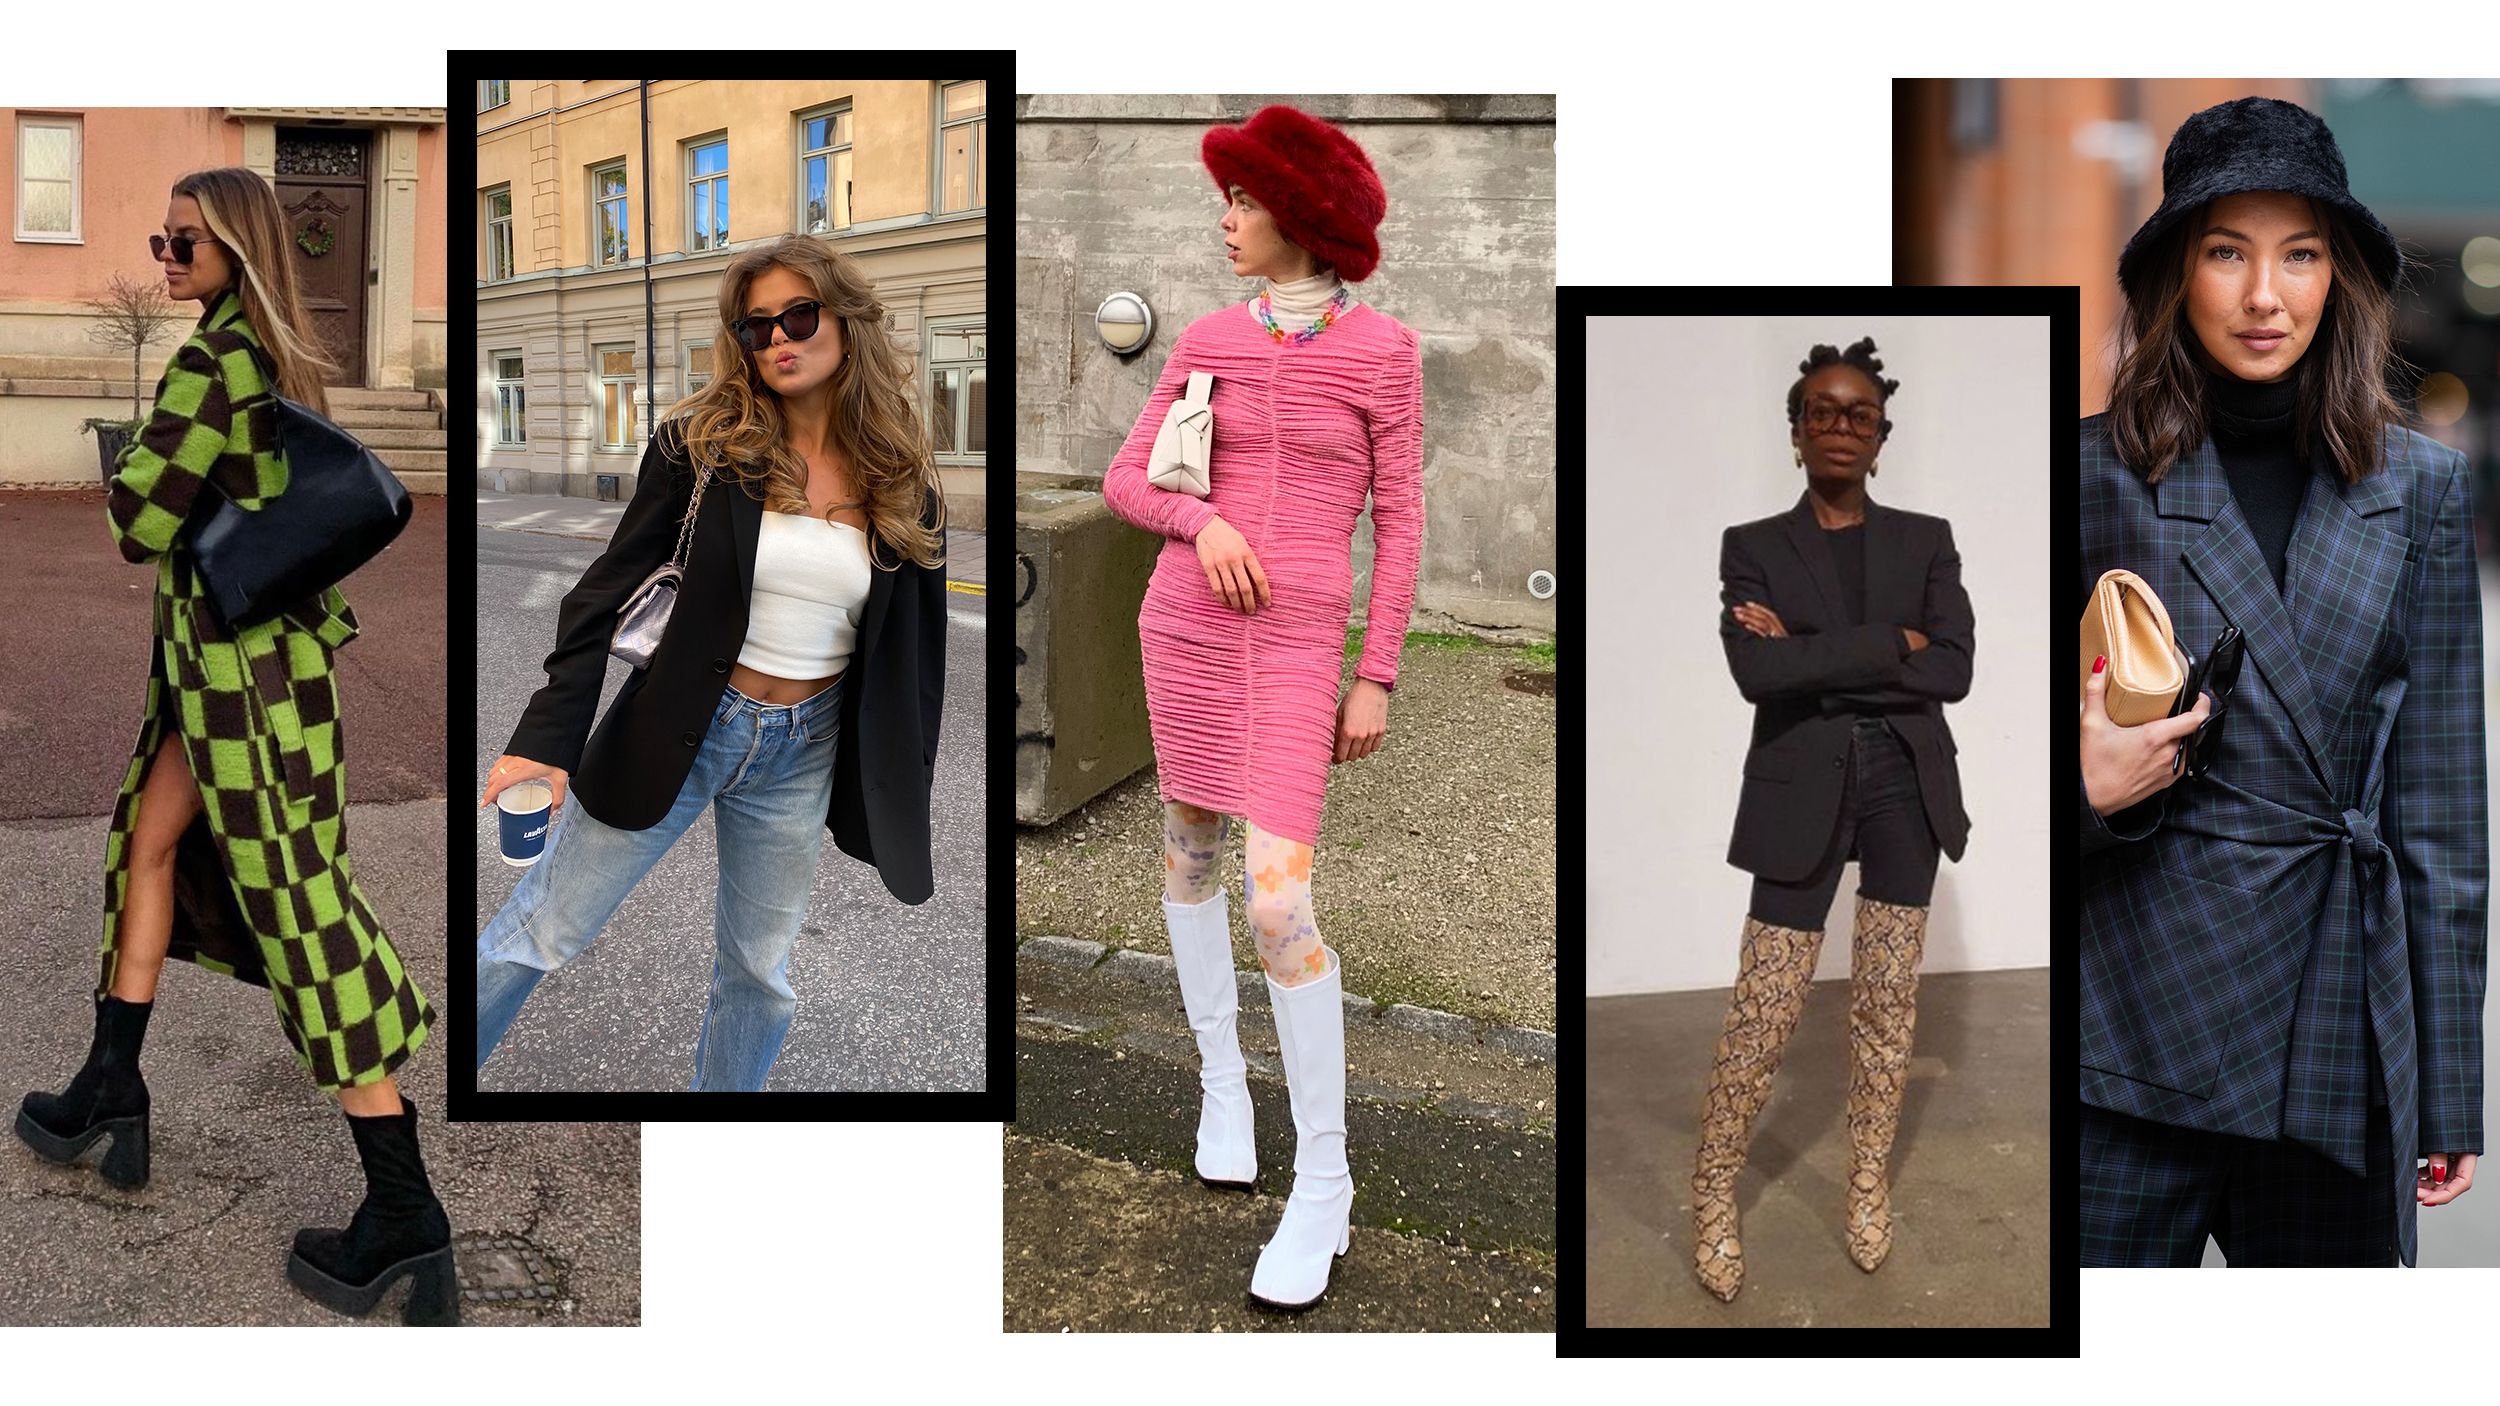 Matilda Djerf and other fashion influencers have recently